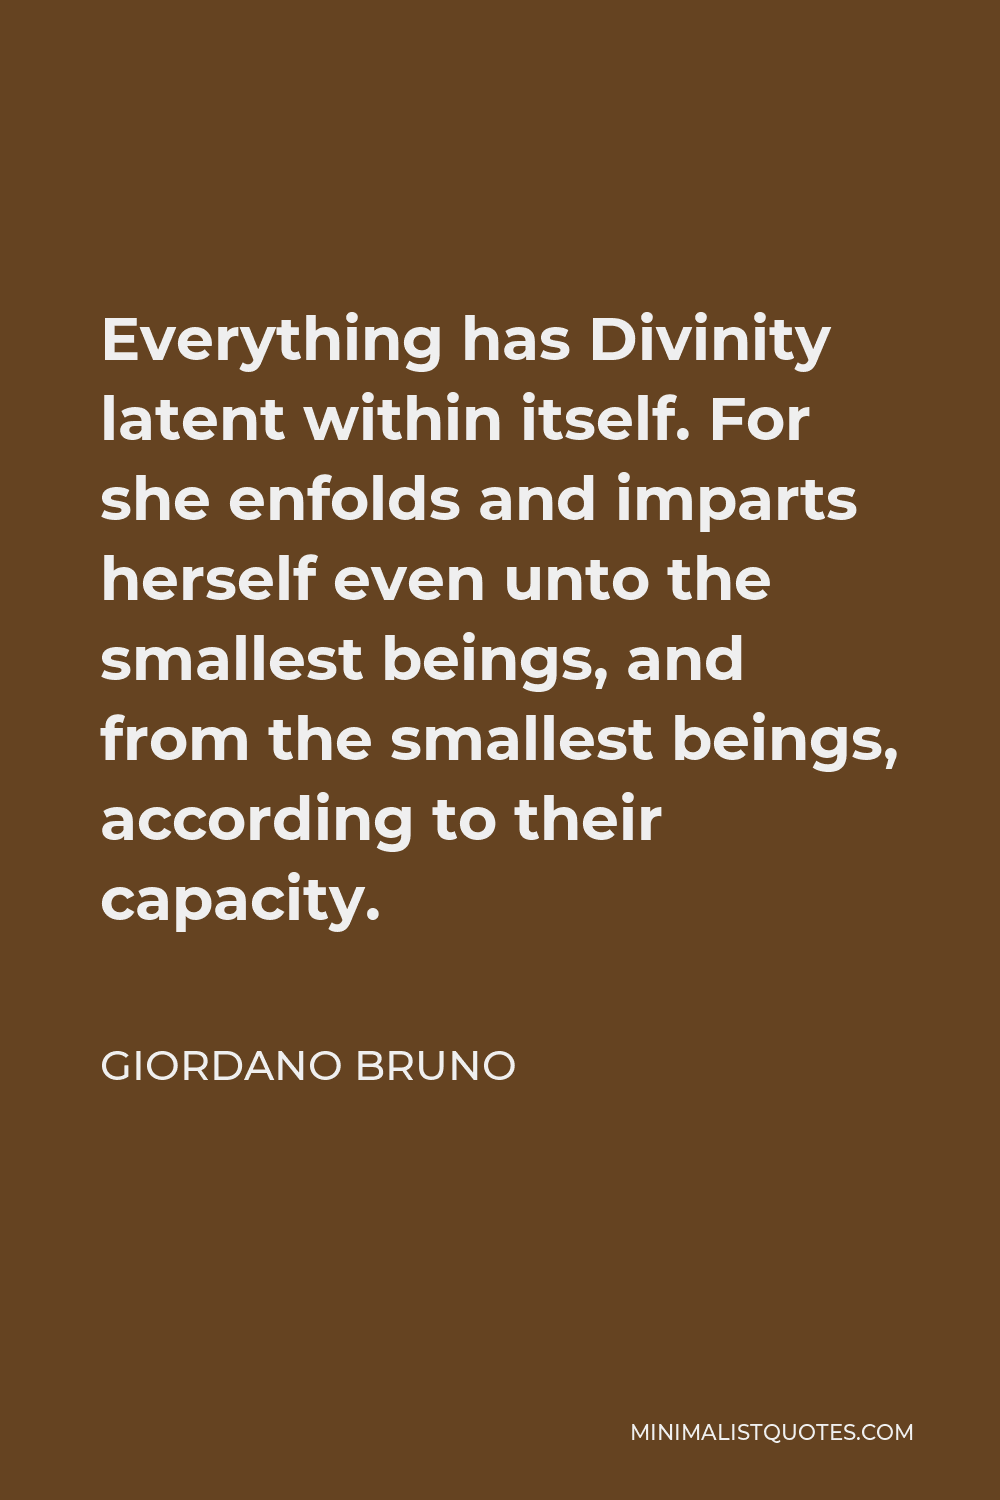 Giordano Bruno Quote - Everything has Divinity latent within itself. For she enfolds and imparts herself even unto the smallest beings, and from the smallest beings, according to their capacity.